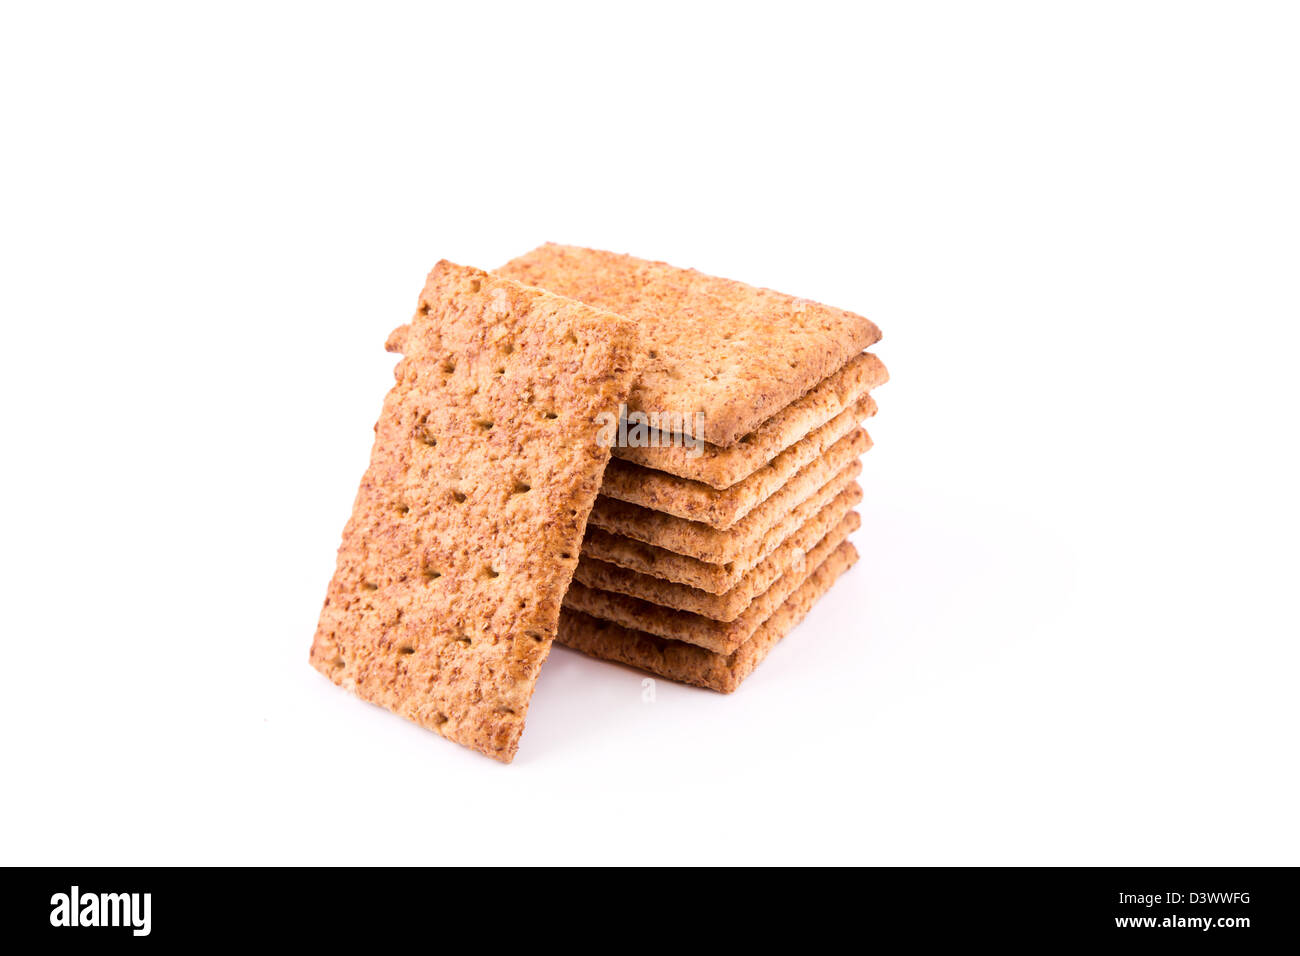 Wholesome biscuits with cereal isolated on white. Healthy diet concept. Stock Photo